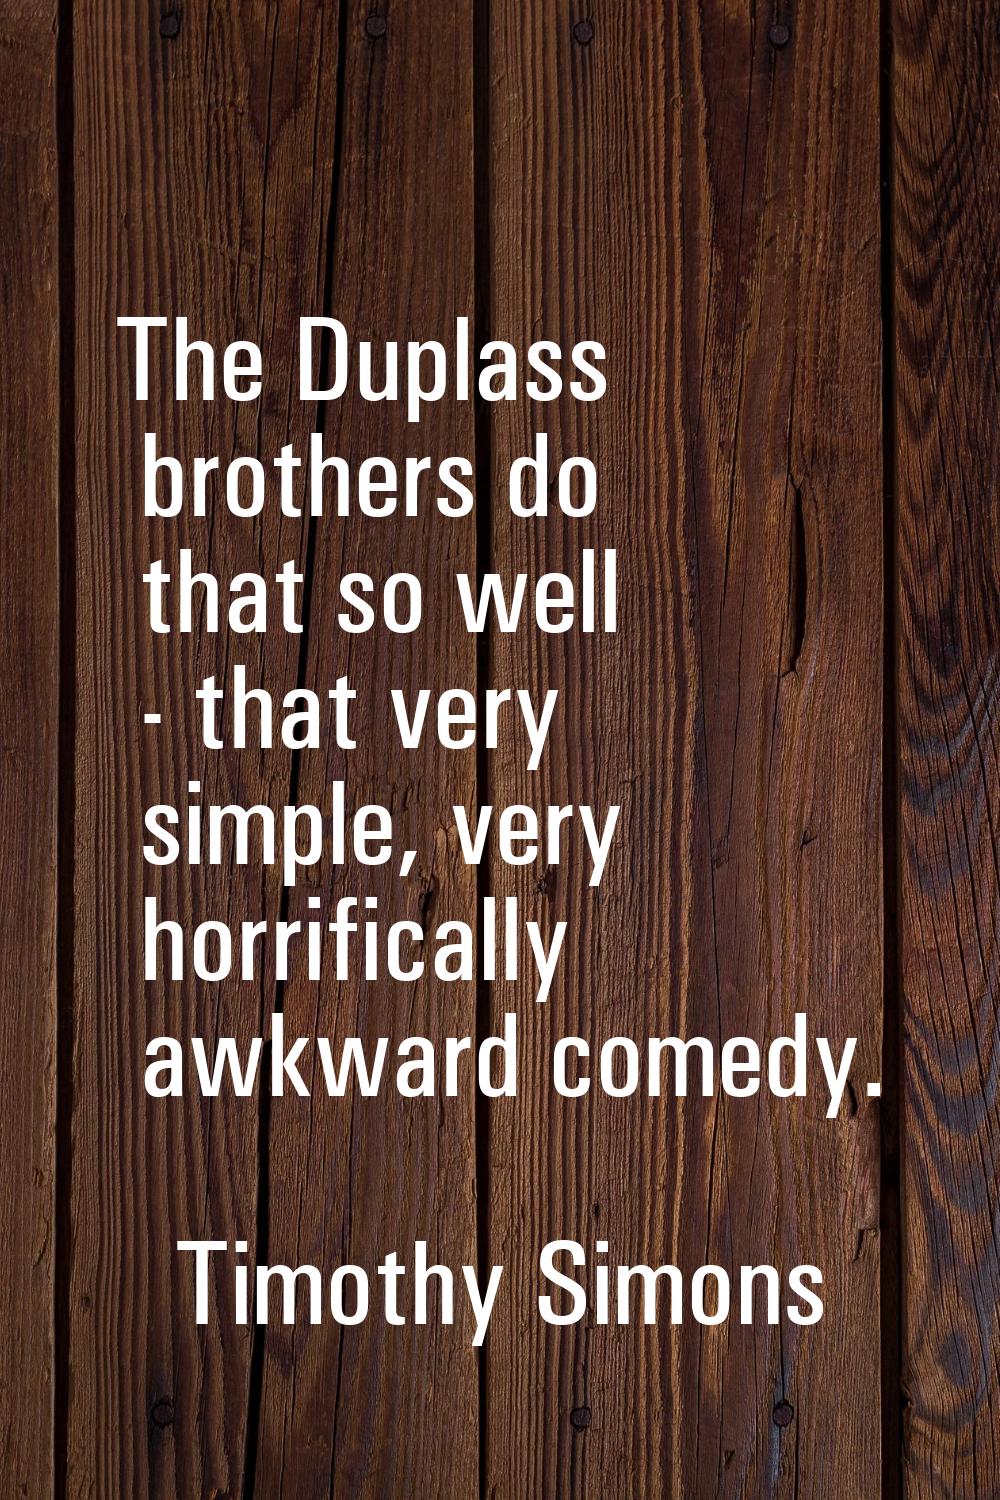 The Duplass brothers do that so well - that very simple, very horrifically awkward comedy.